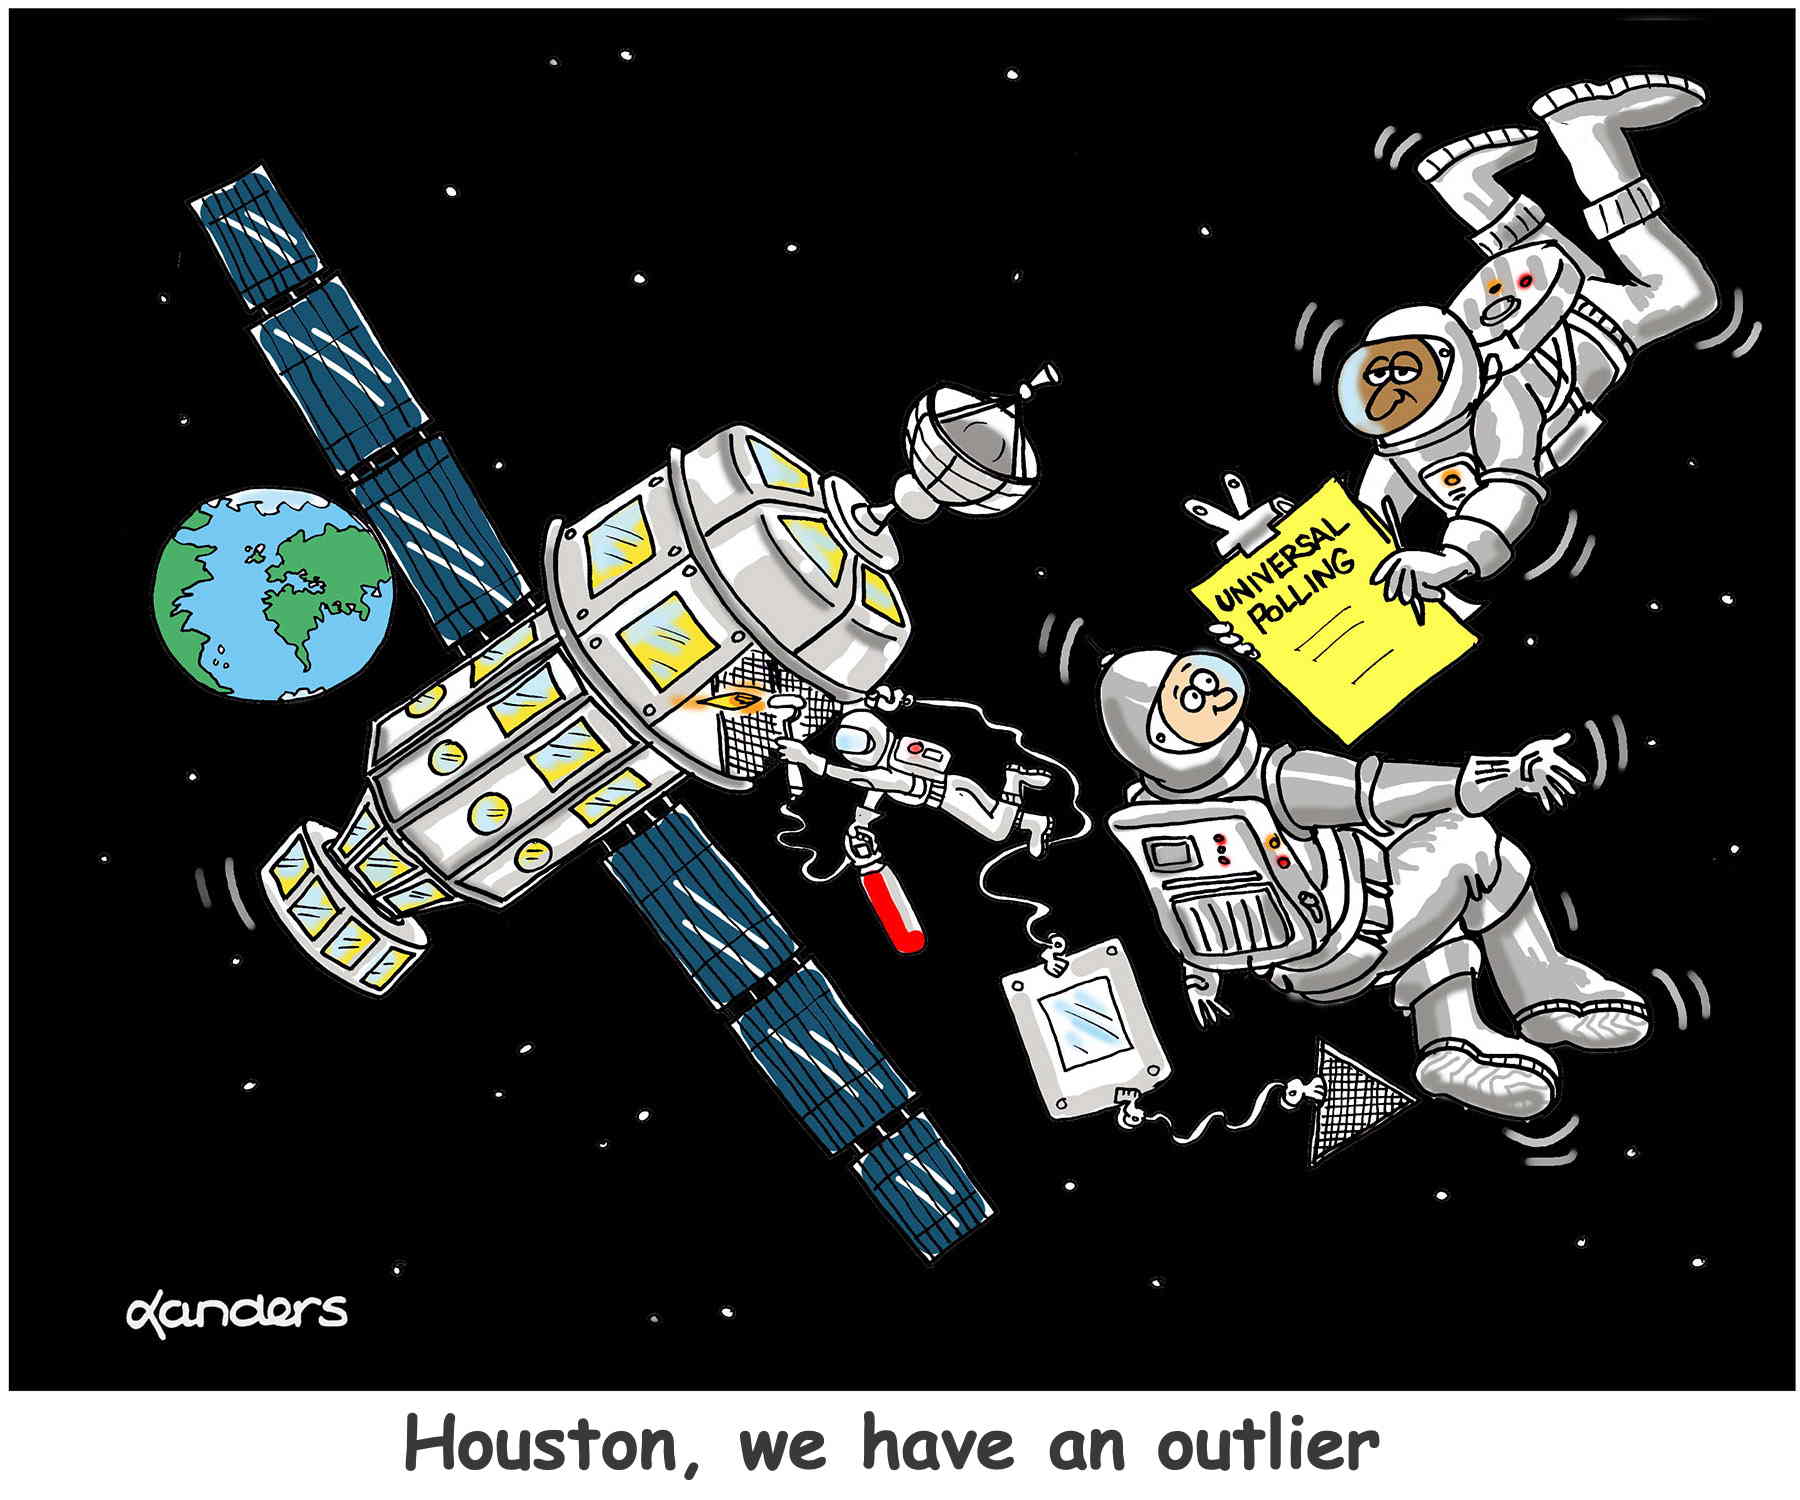 cartoon of astronauts walking in space and one rom" Universal Polling" is doing an interview with another.  Caption says: "Houston, we have an outlier"